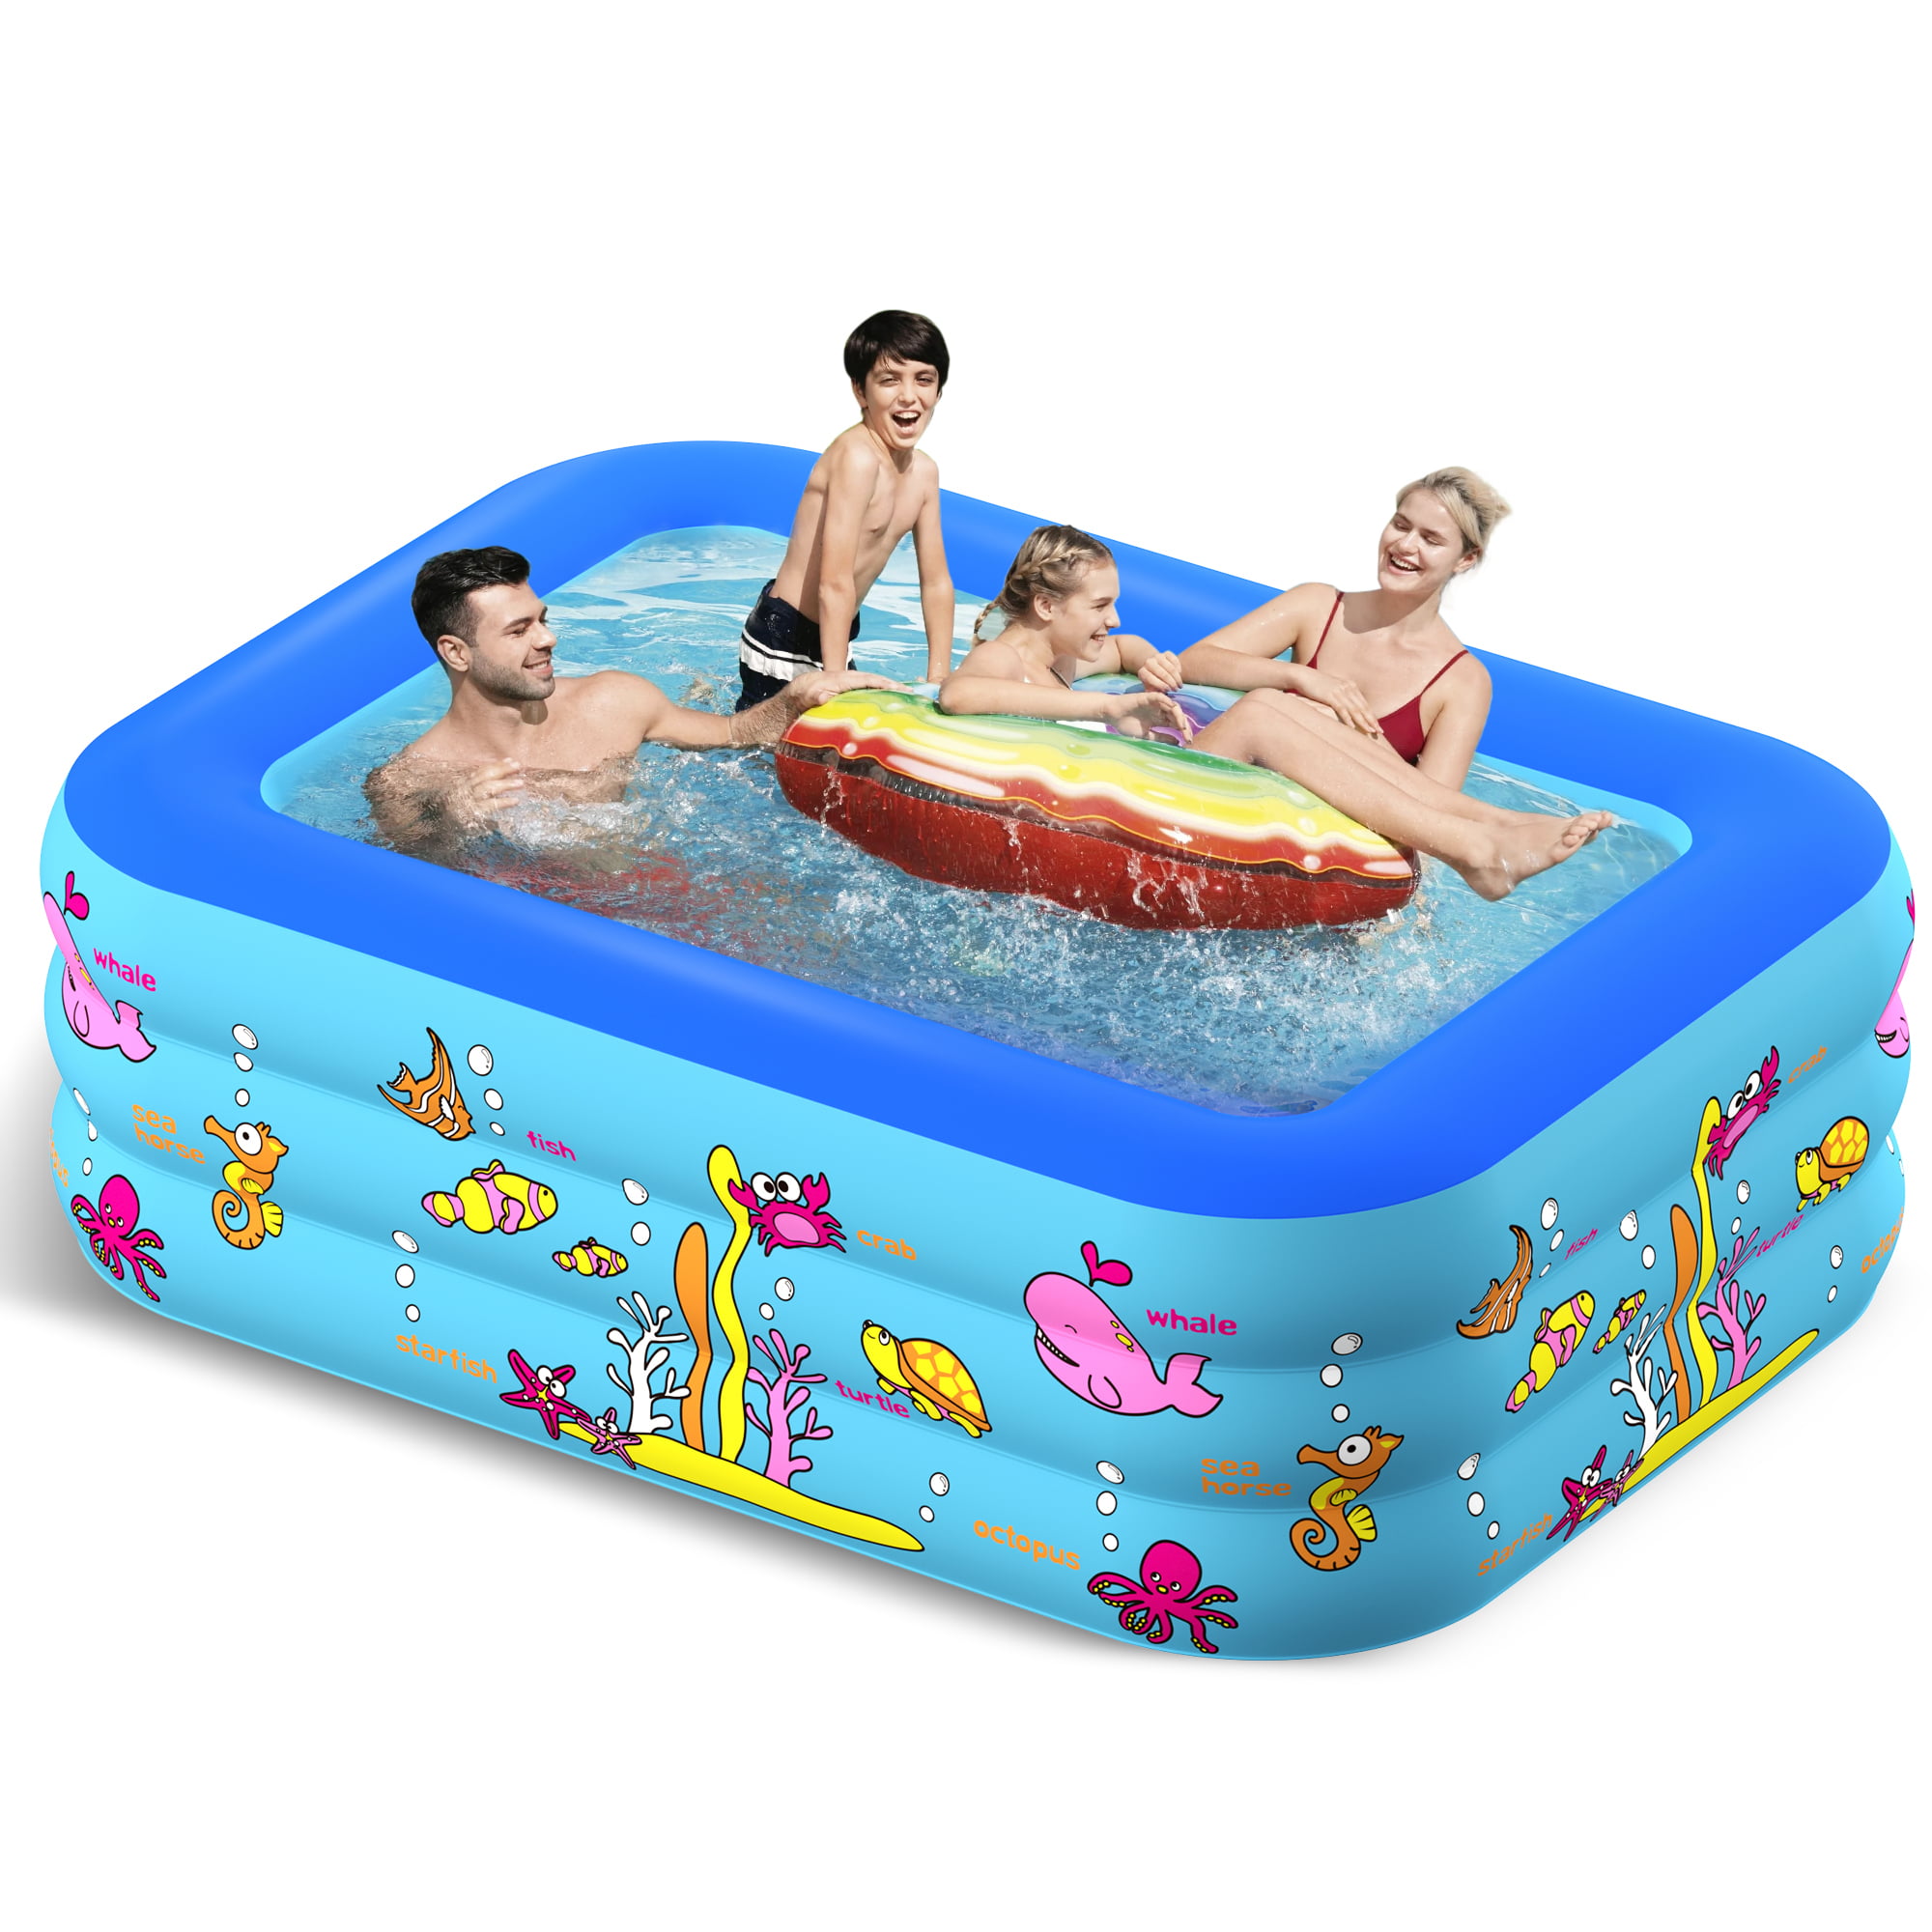 Pool Float Raft PVC Inflatable Floating Row Inflatable Game Floating Row Inflatable Beer ping Pong Table Water Toy for Children Adults Sea Party